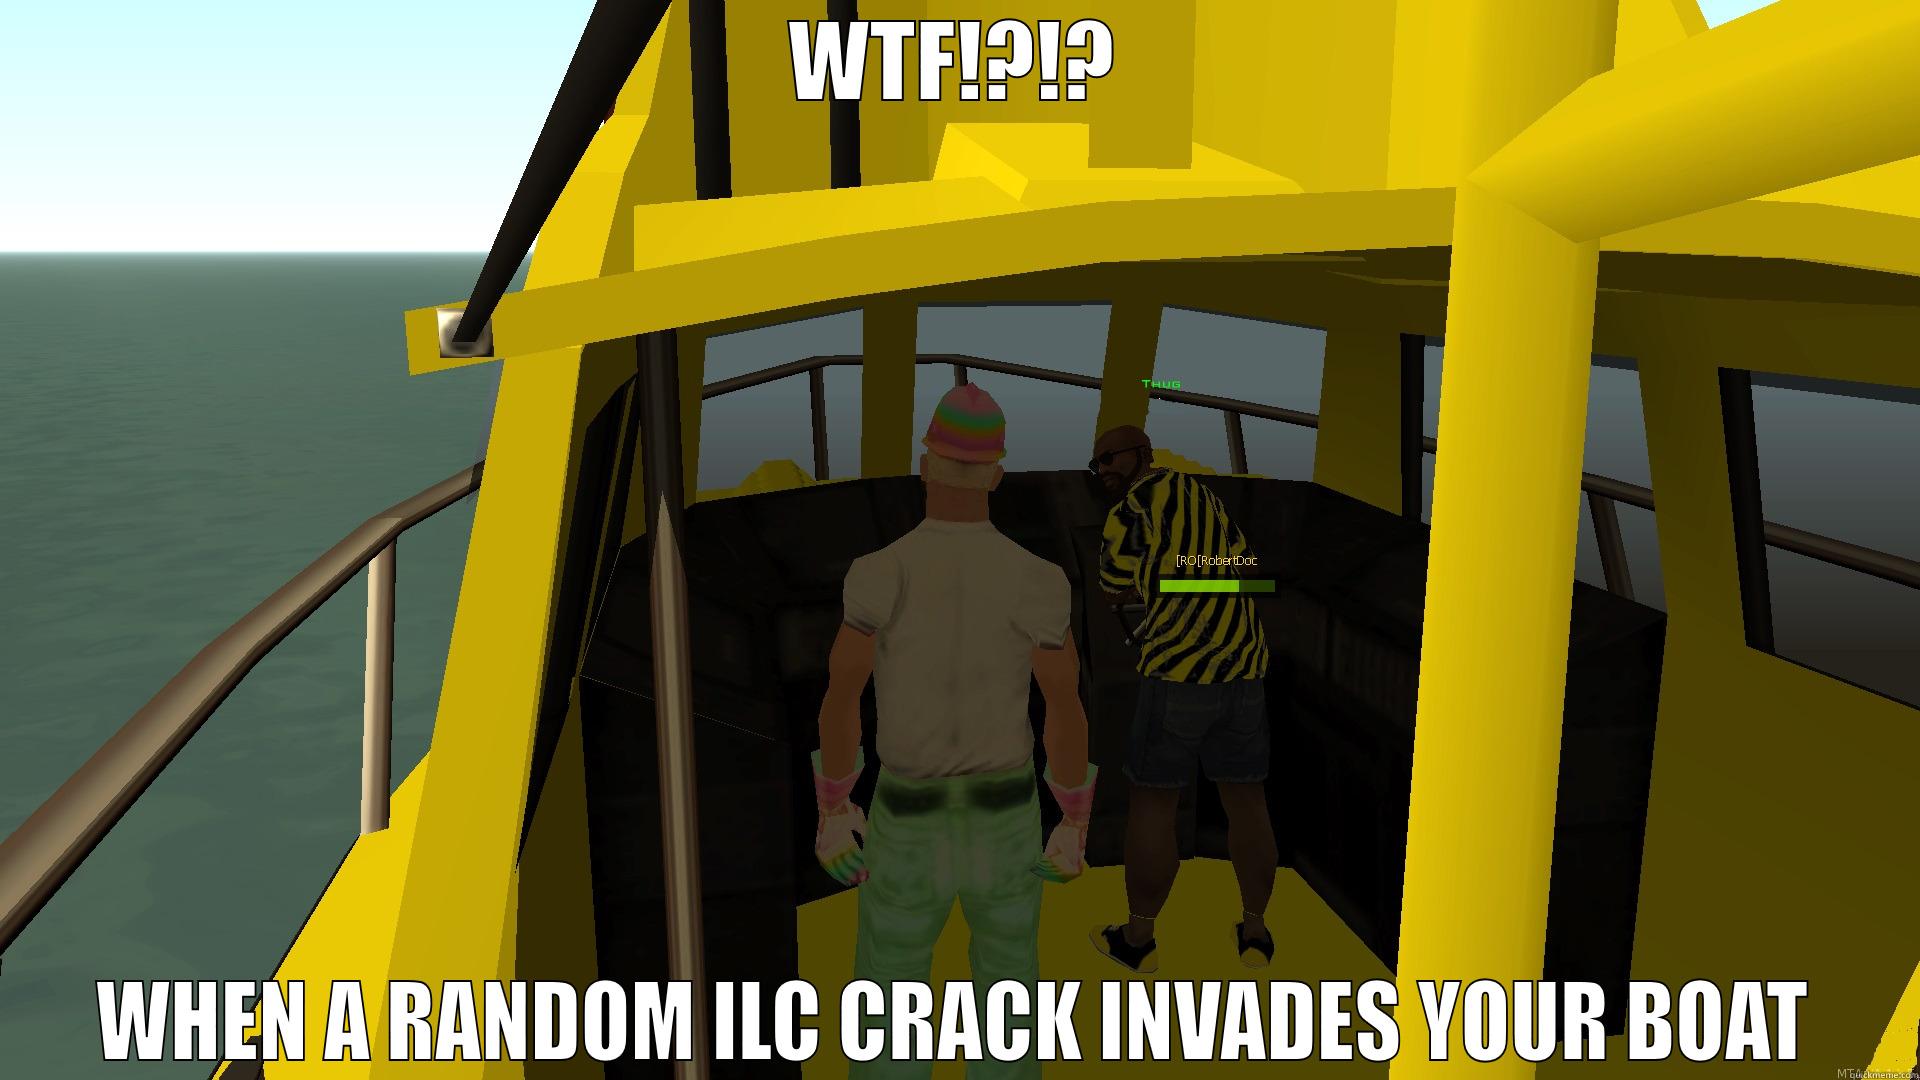 WTF!?!? WHEN A RANDOM ILC CRACK INVADES YOUR BOAT Misc